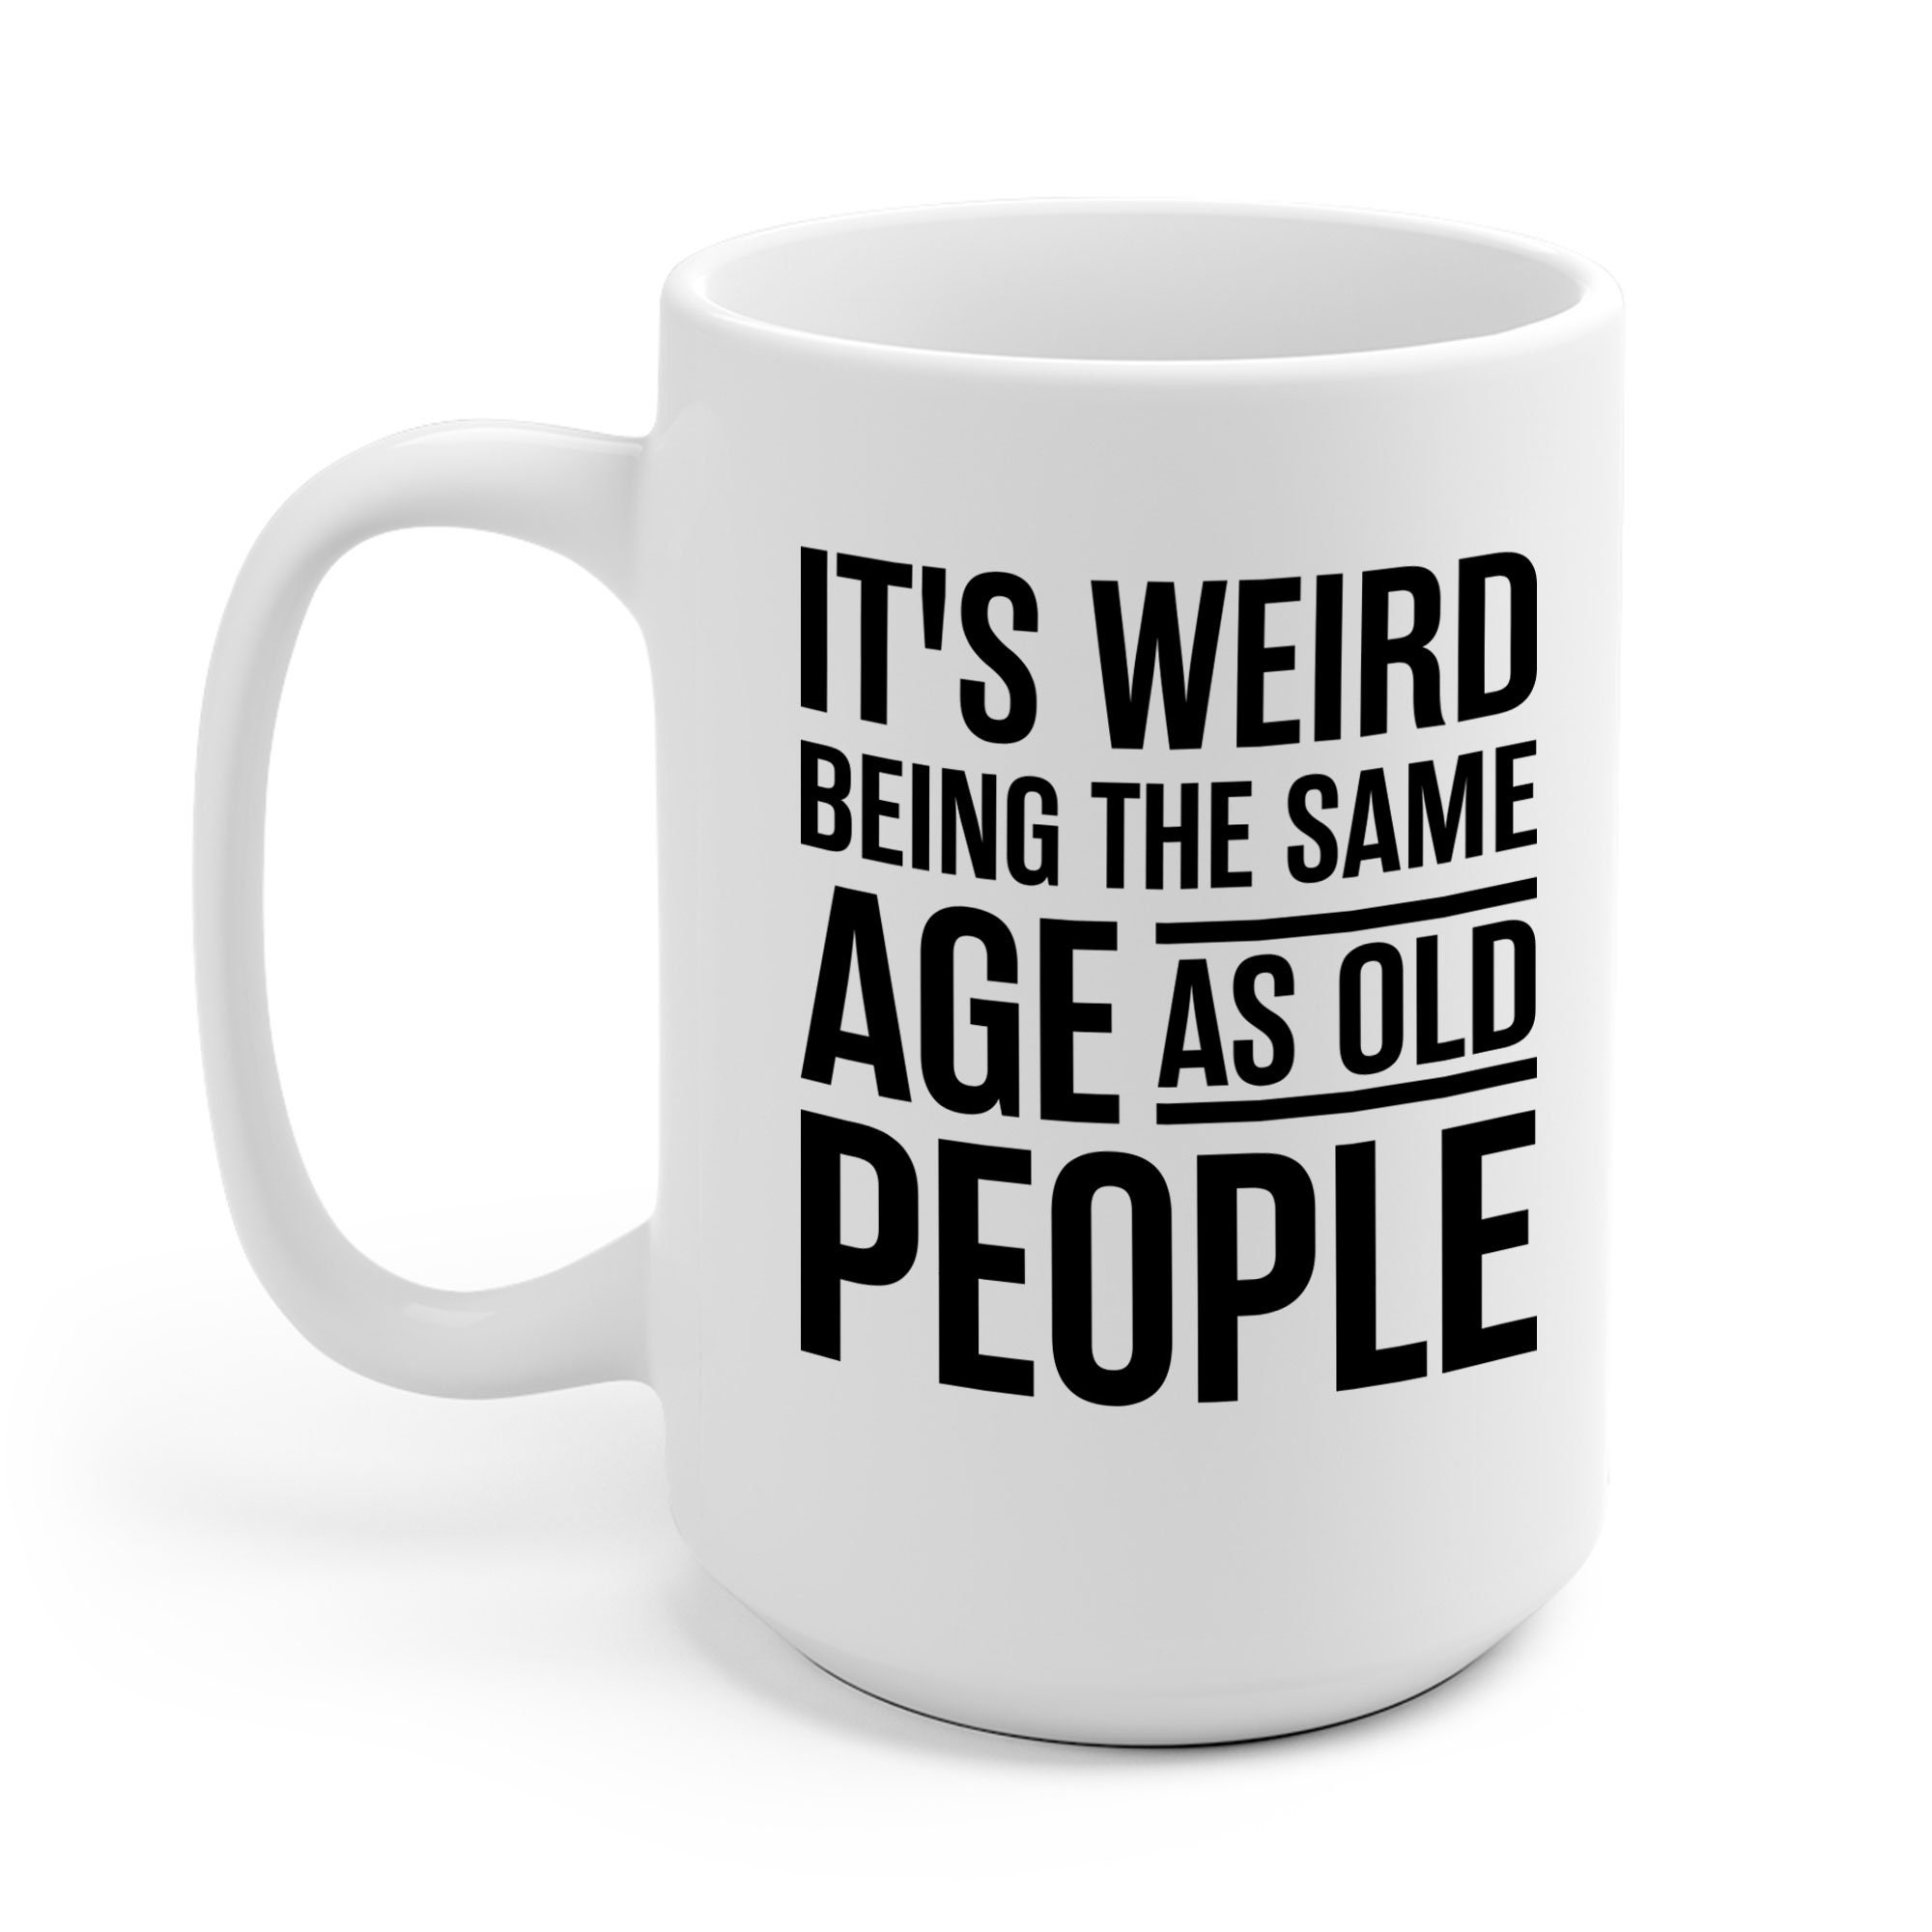 Weird Being The Same Age As Old People - 20 Oz Tumbler